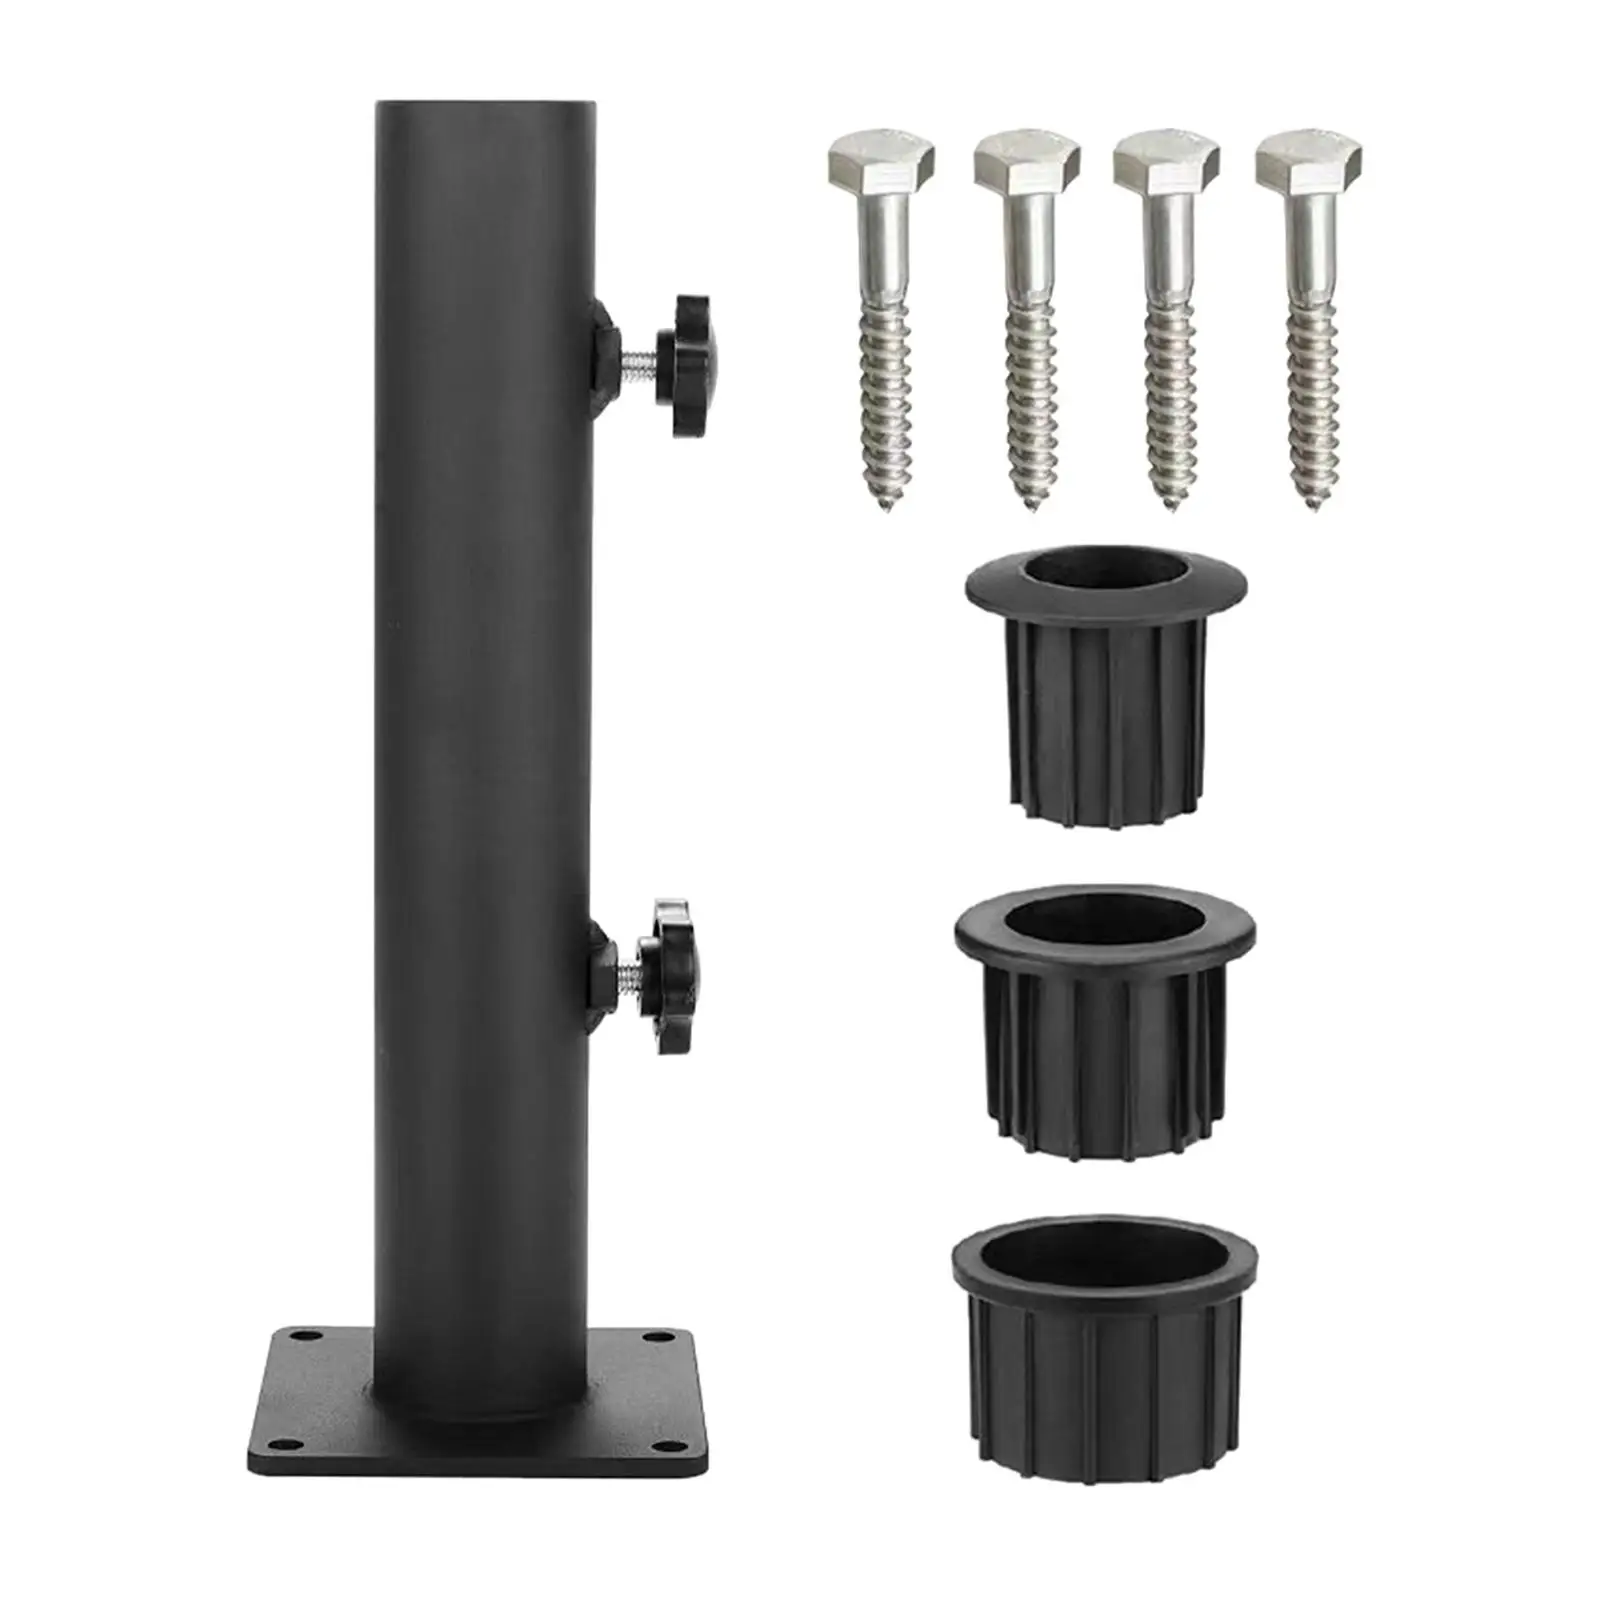 Outdoor Umbrella Base Stand Heavy Duty Weather Resistant Thicked Iron Patio Umbrella Holder Stand for Balcony Pontoons Backyard